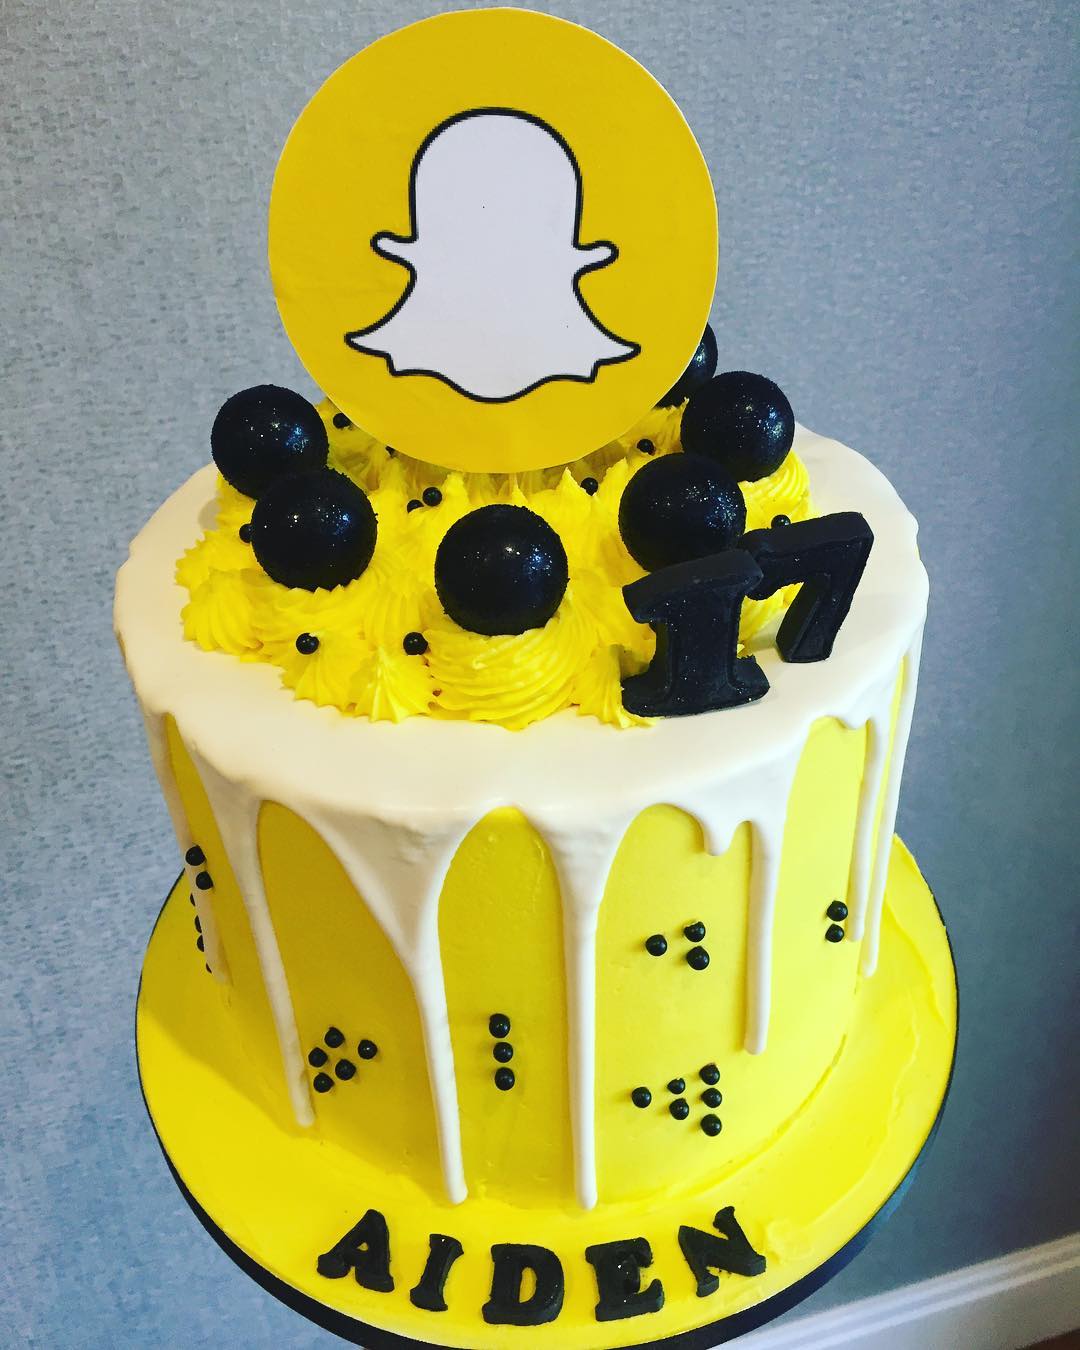 15 Snapchat Birthday Cake Ideas That Are Simply Amazing